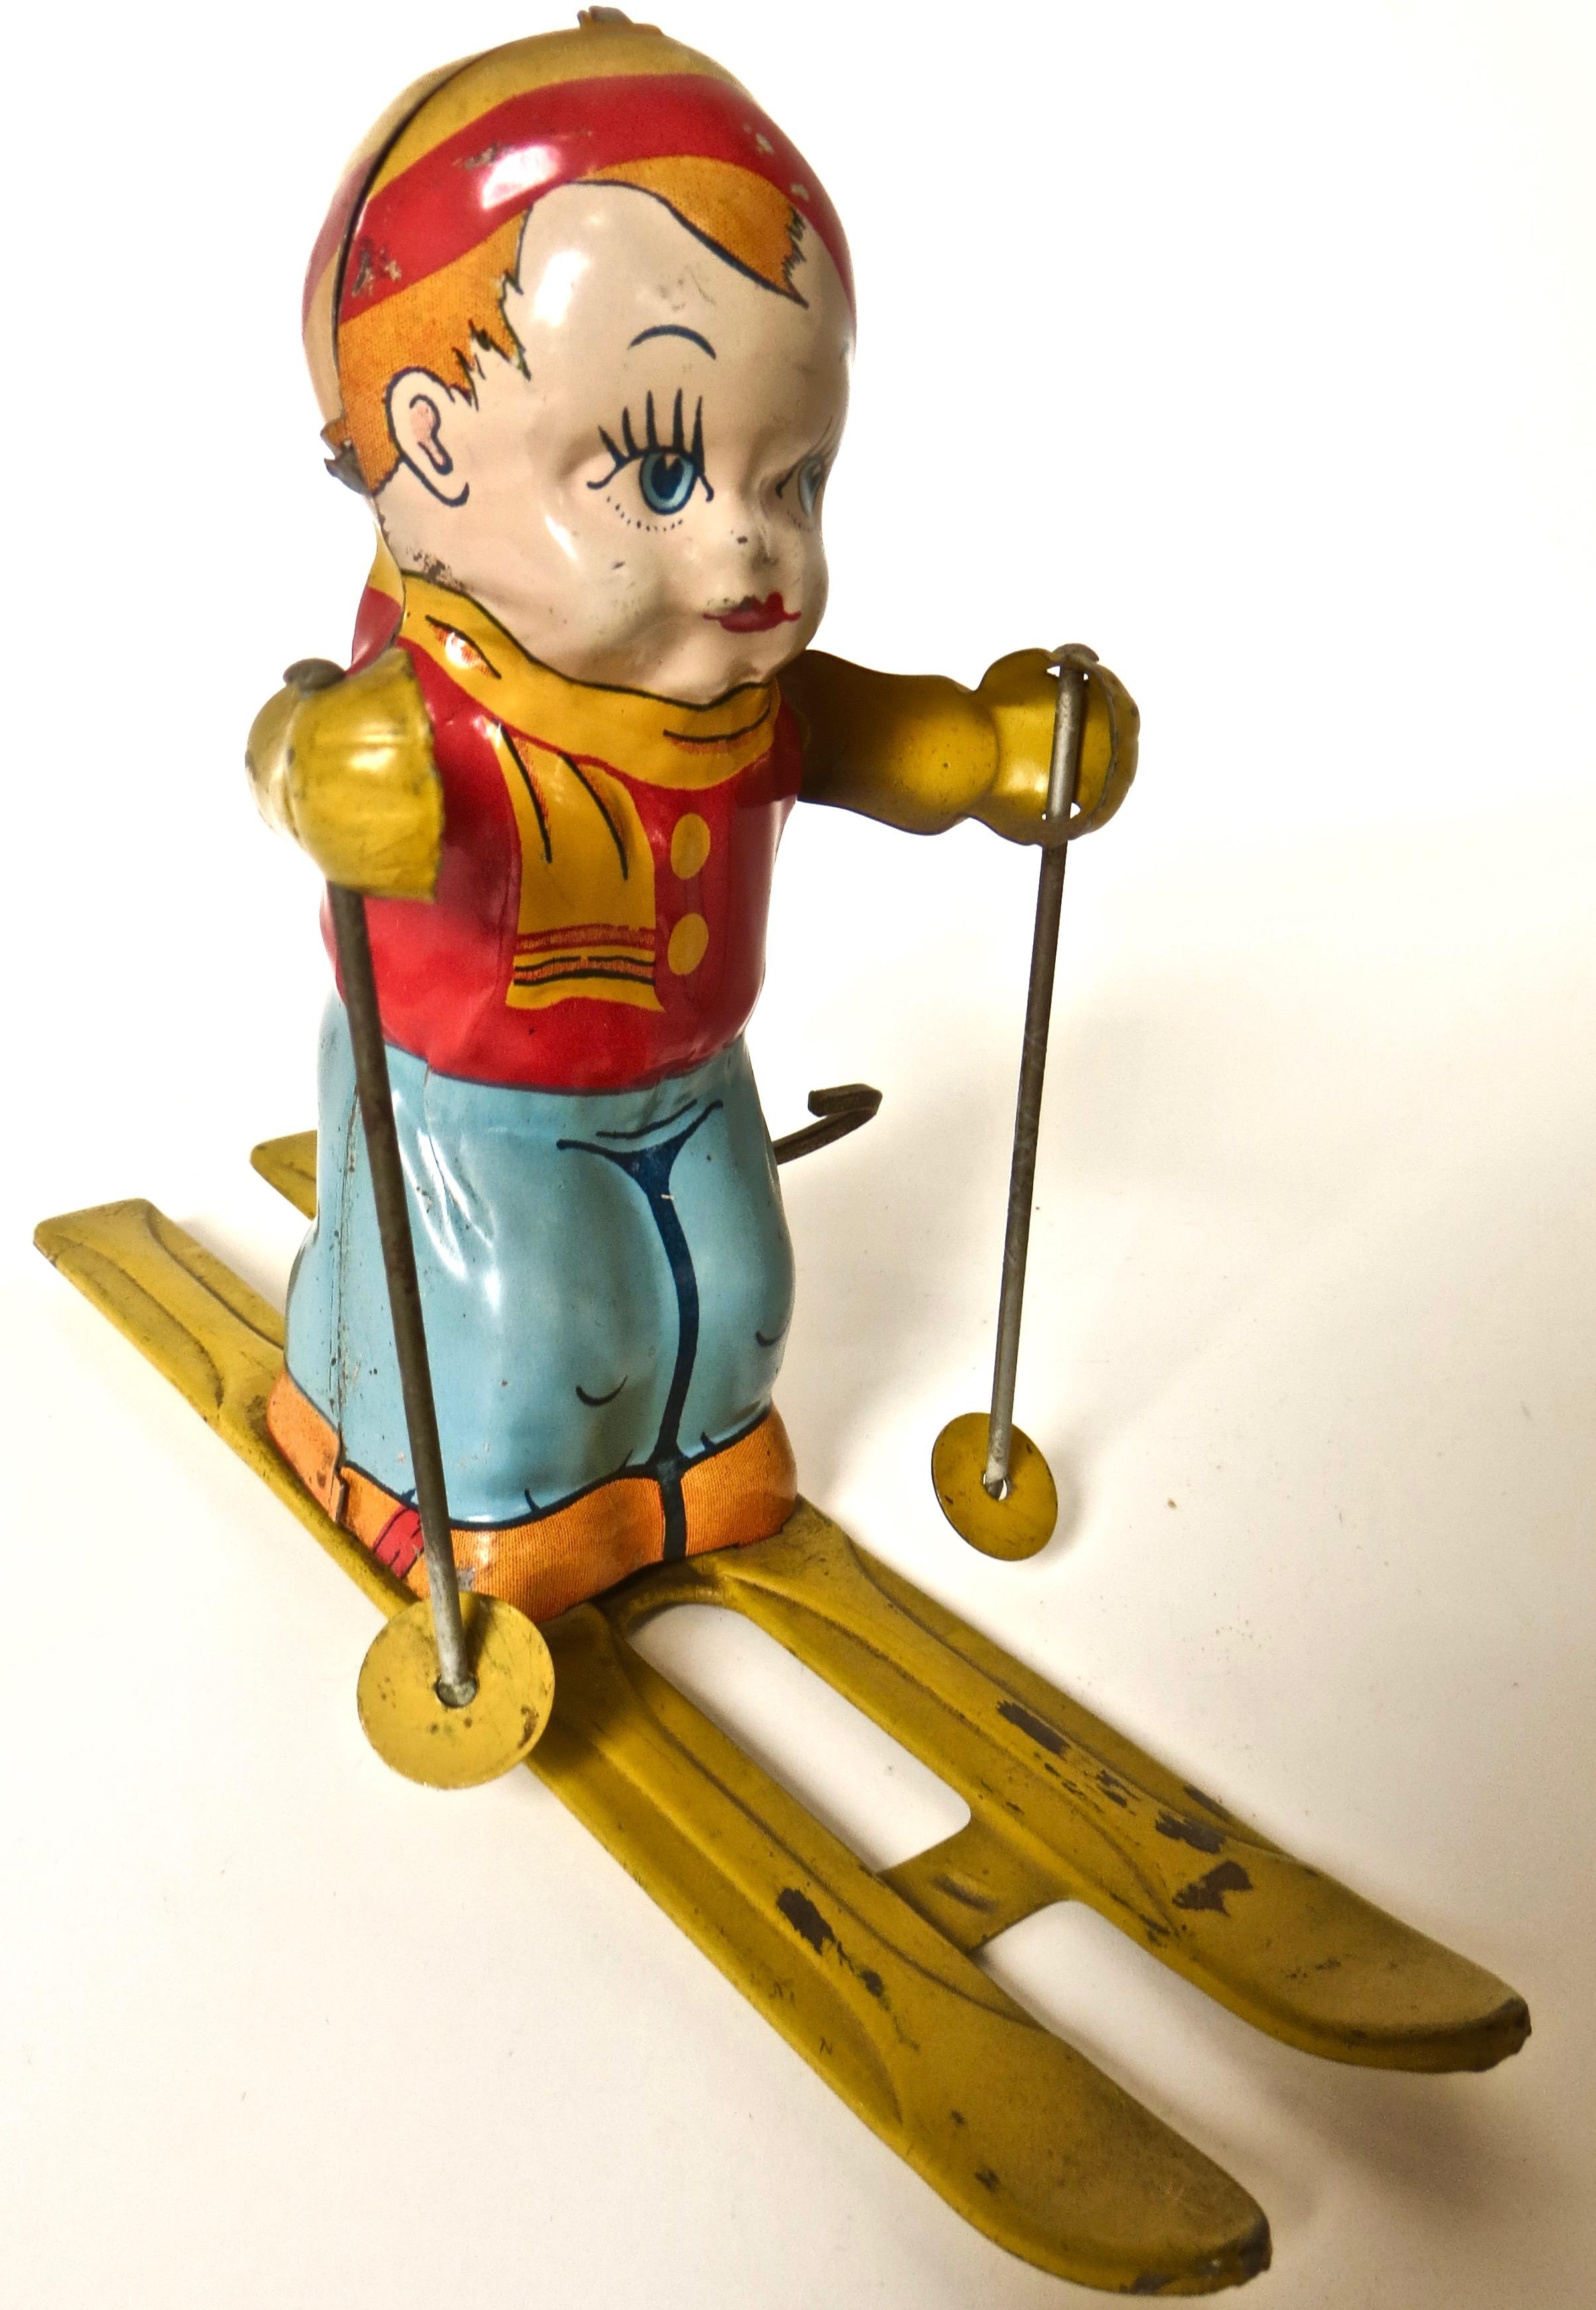 Very nice condition all tin, vintage wind up toy by J. Chein Company, New York City, circa 1950, 